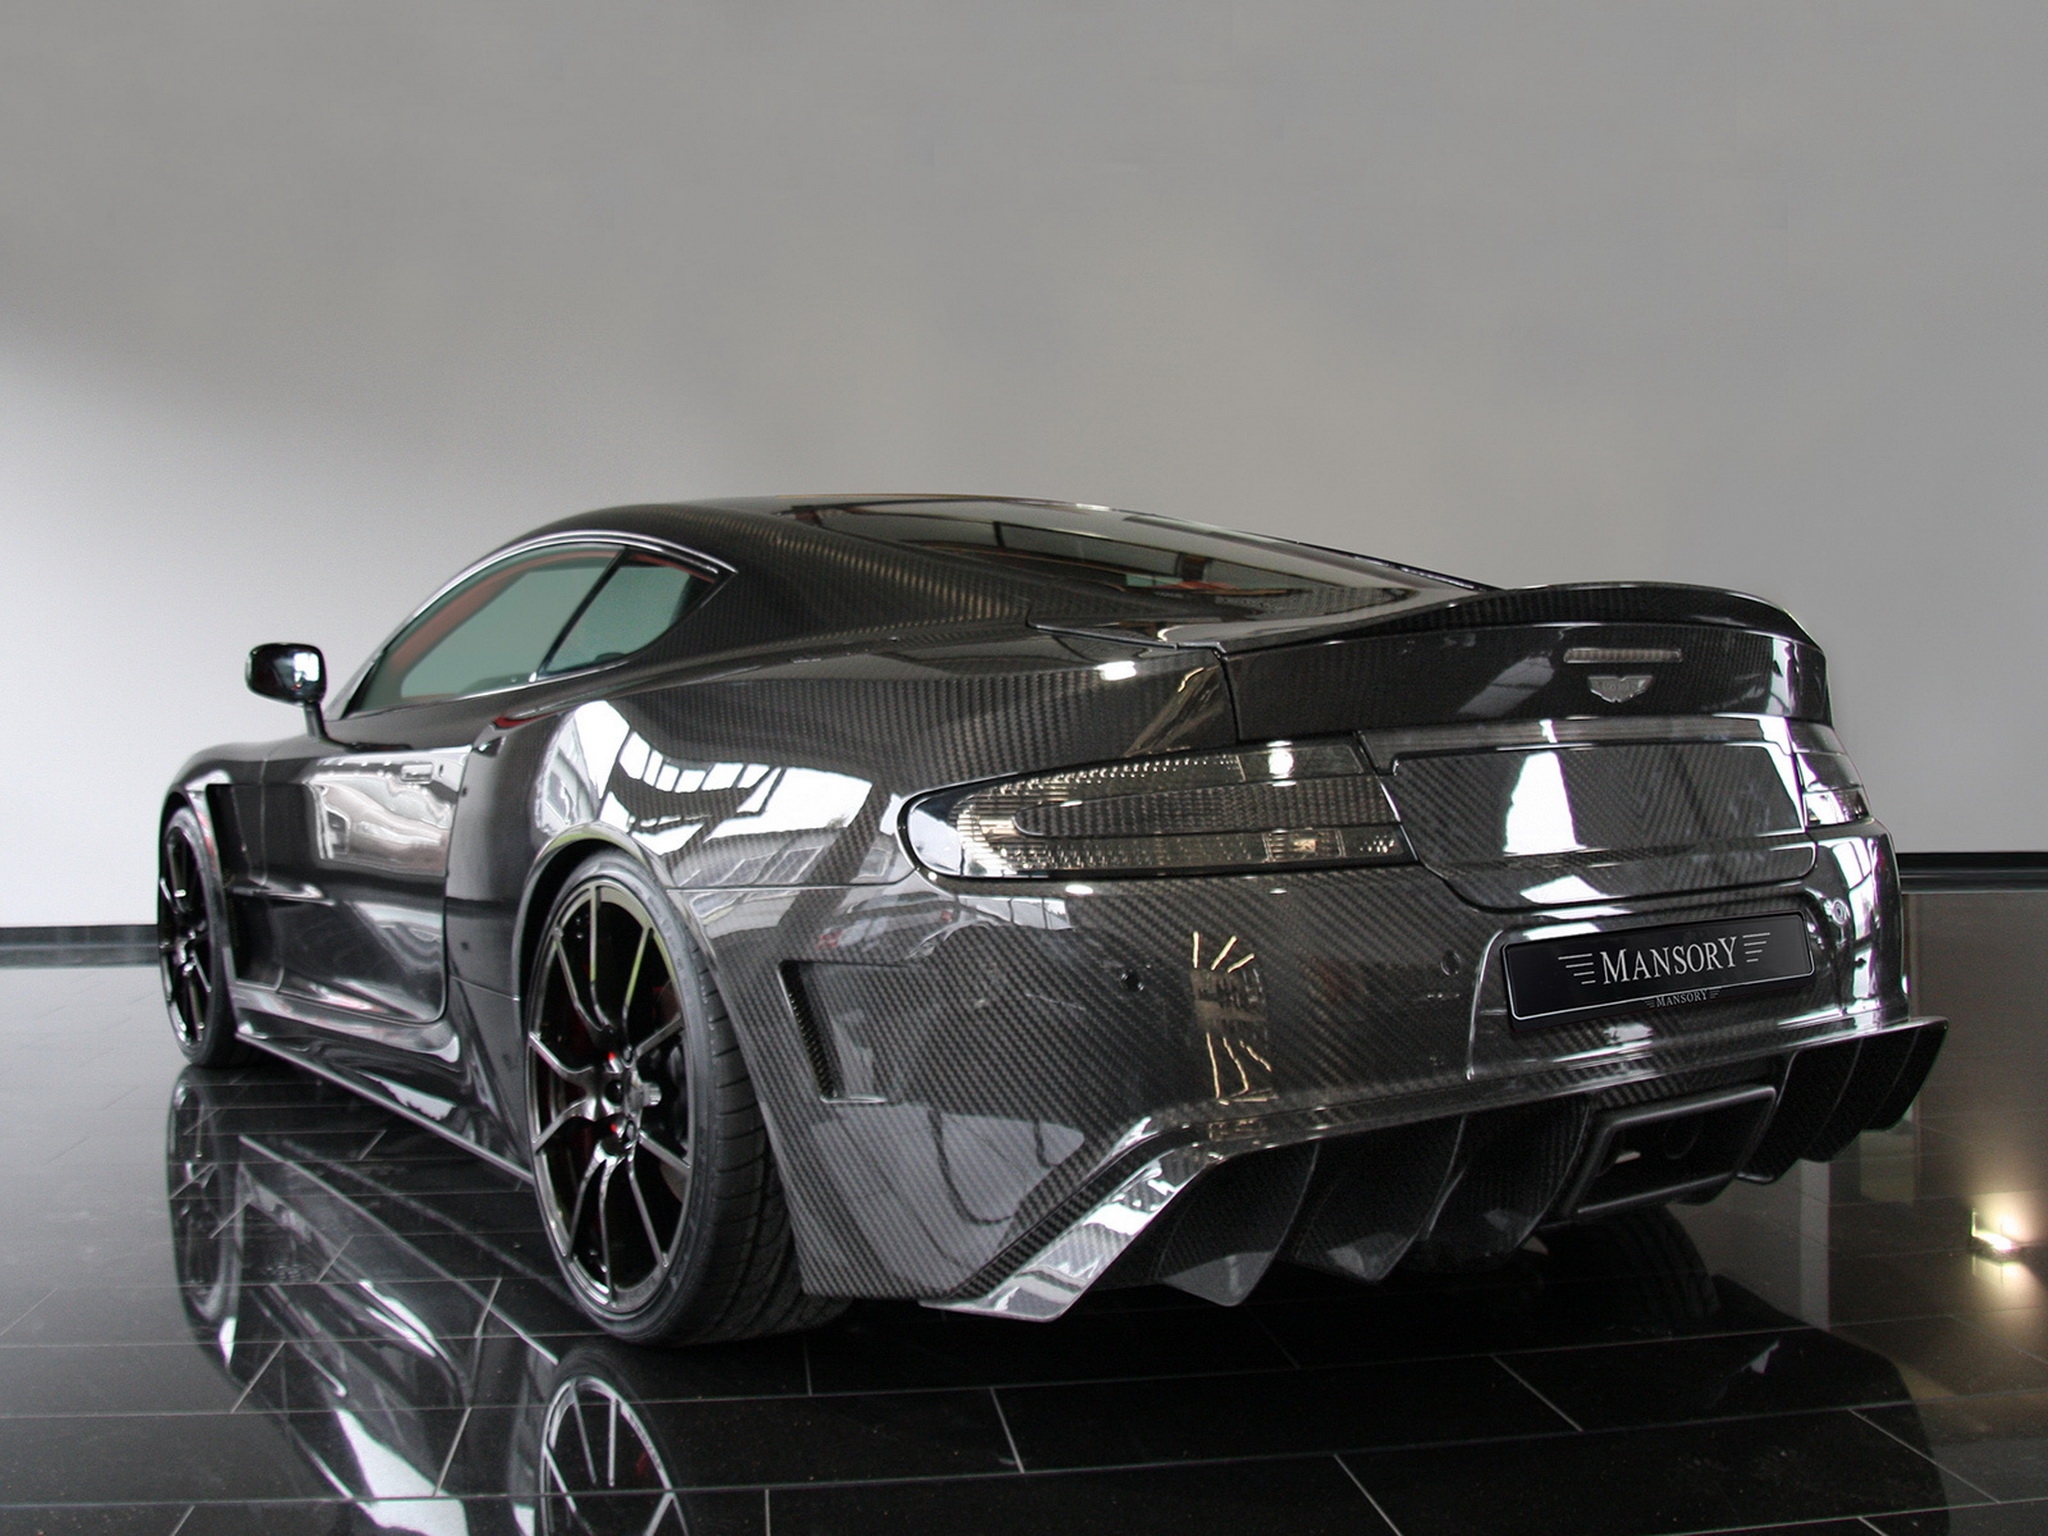 black, cars, aston martin, carbon, reflection, back view, rear view, style, dbs, 2009, mansory High Definition image